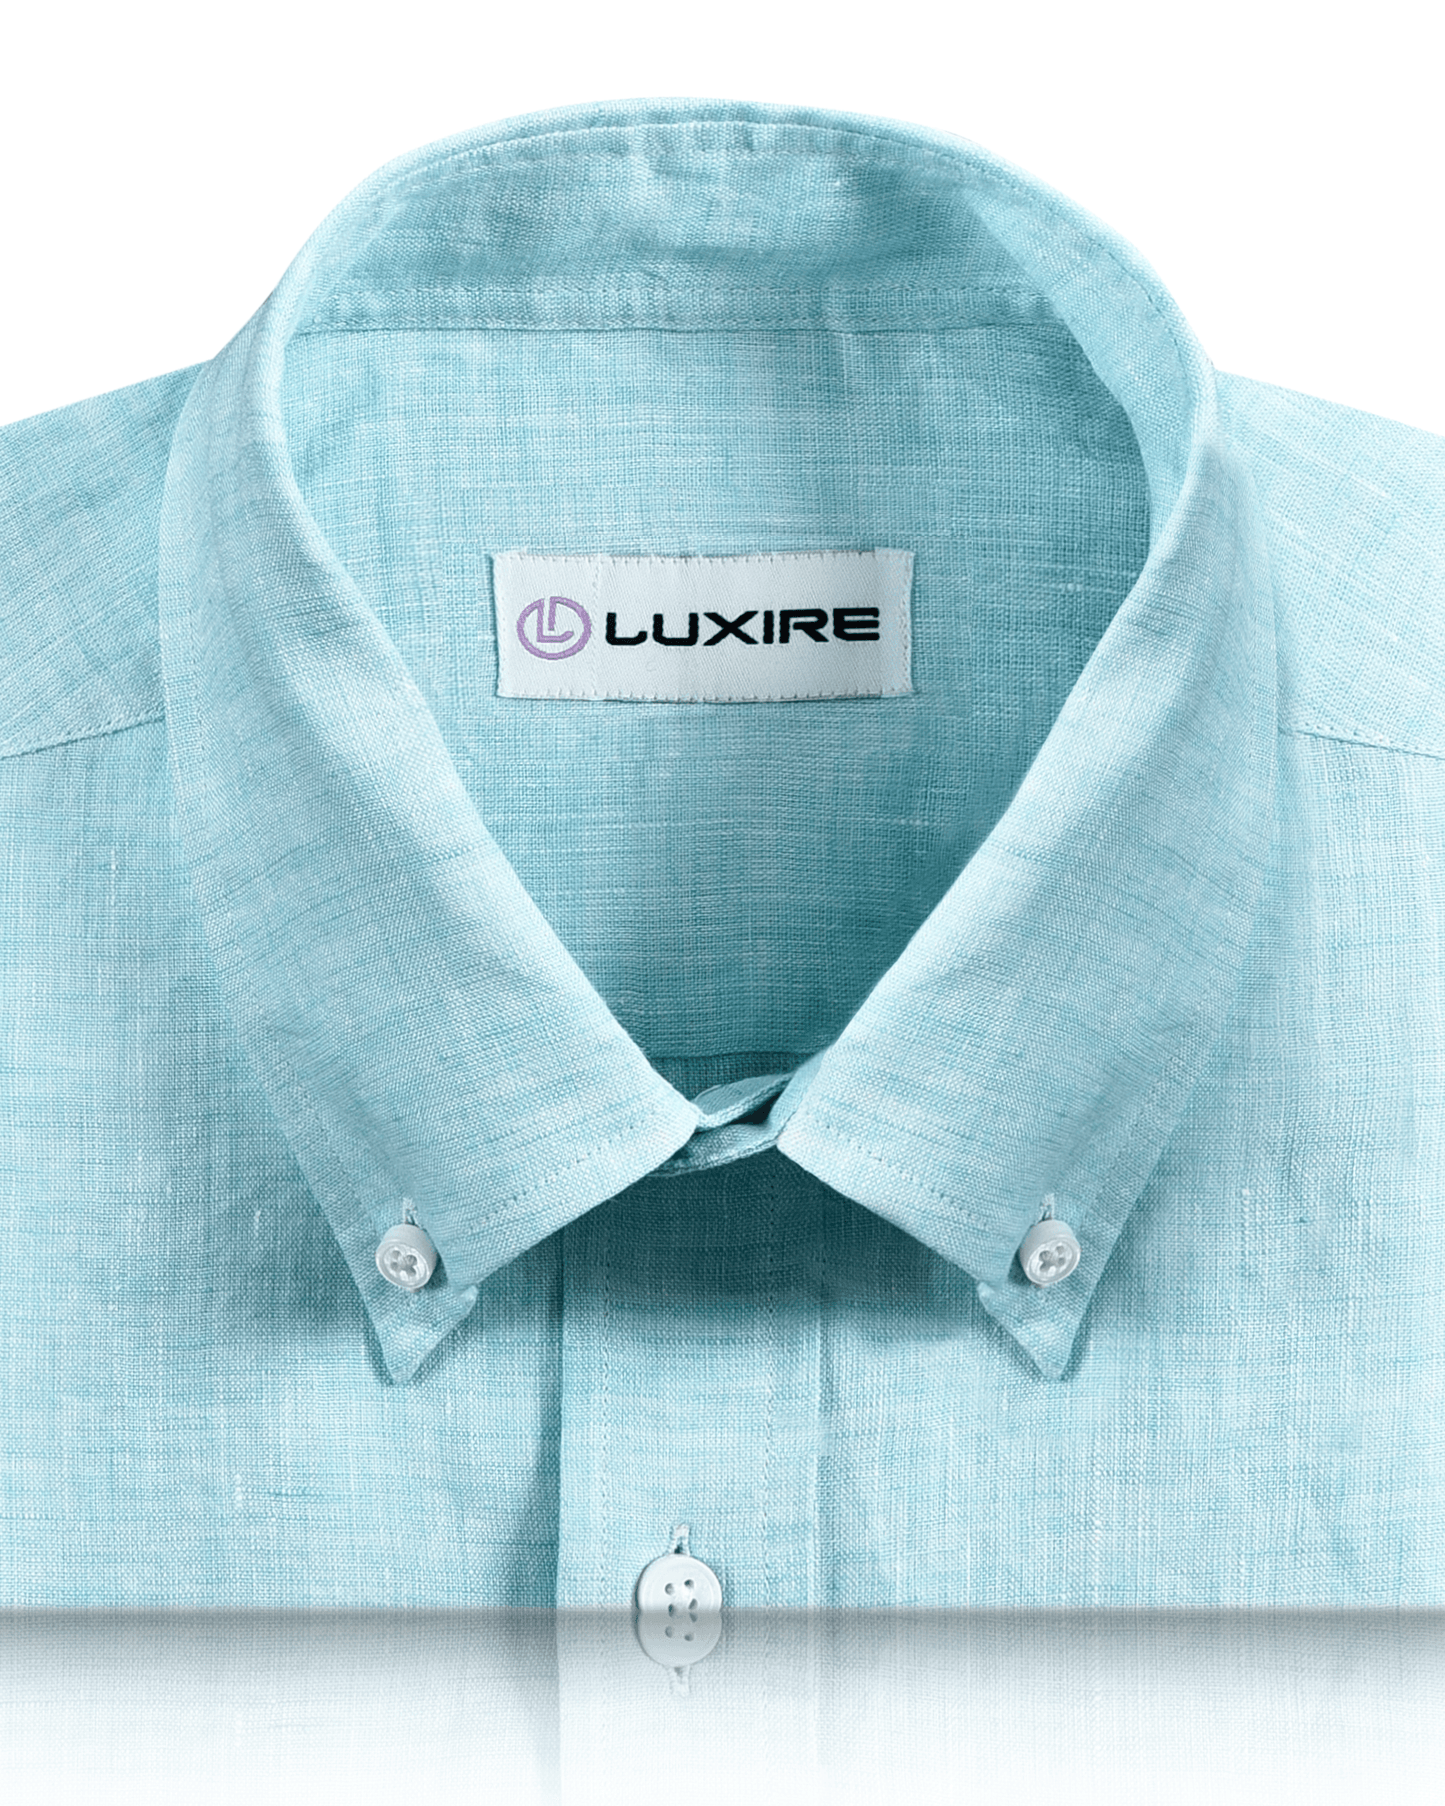 Collar of the custom linen shirt for men in sea green by Luxire Clothing